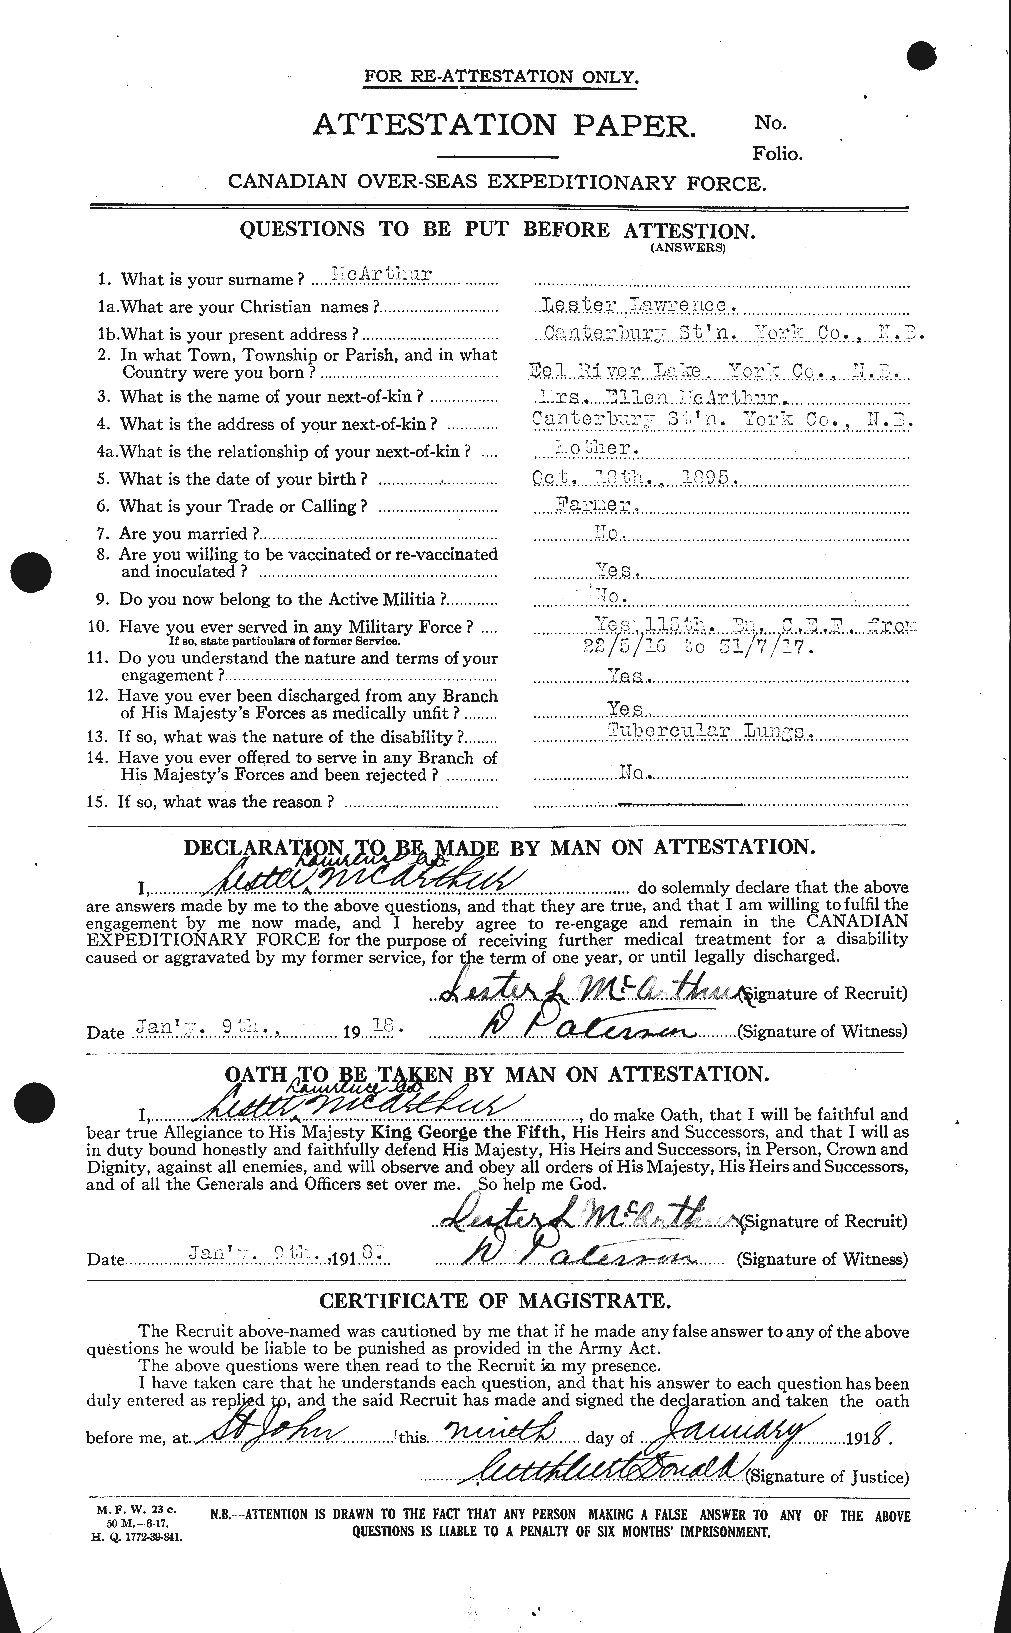 Personnel Records of the First World War - CEF 130702a